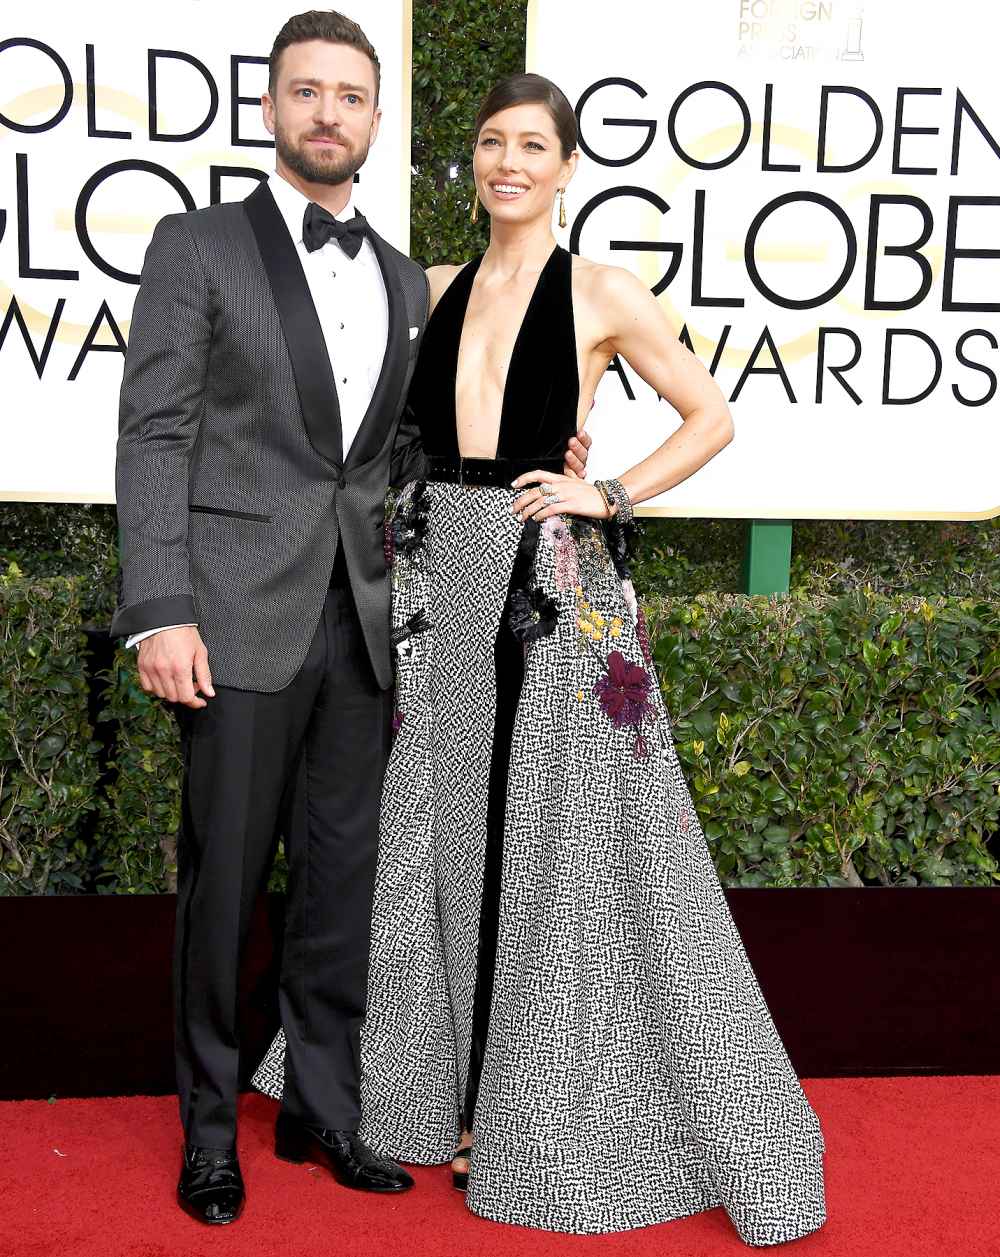 Justin Timberlake and Jessica Biel attend the 74th Annual Golden Globe Awards at the Beverly Hilton Hotel on Jan. 8, 2017, in Beverly Hills.